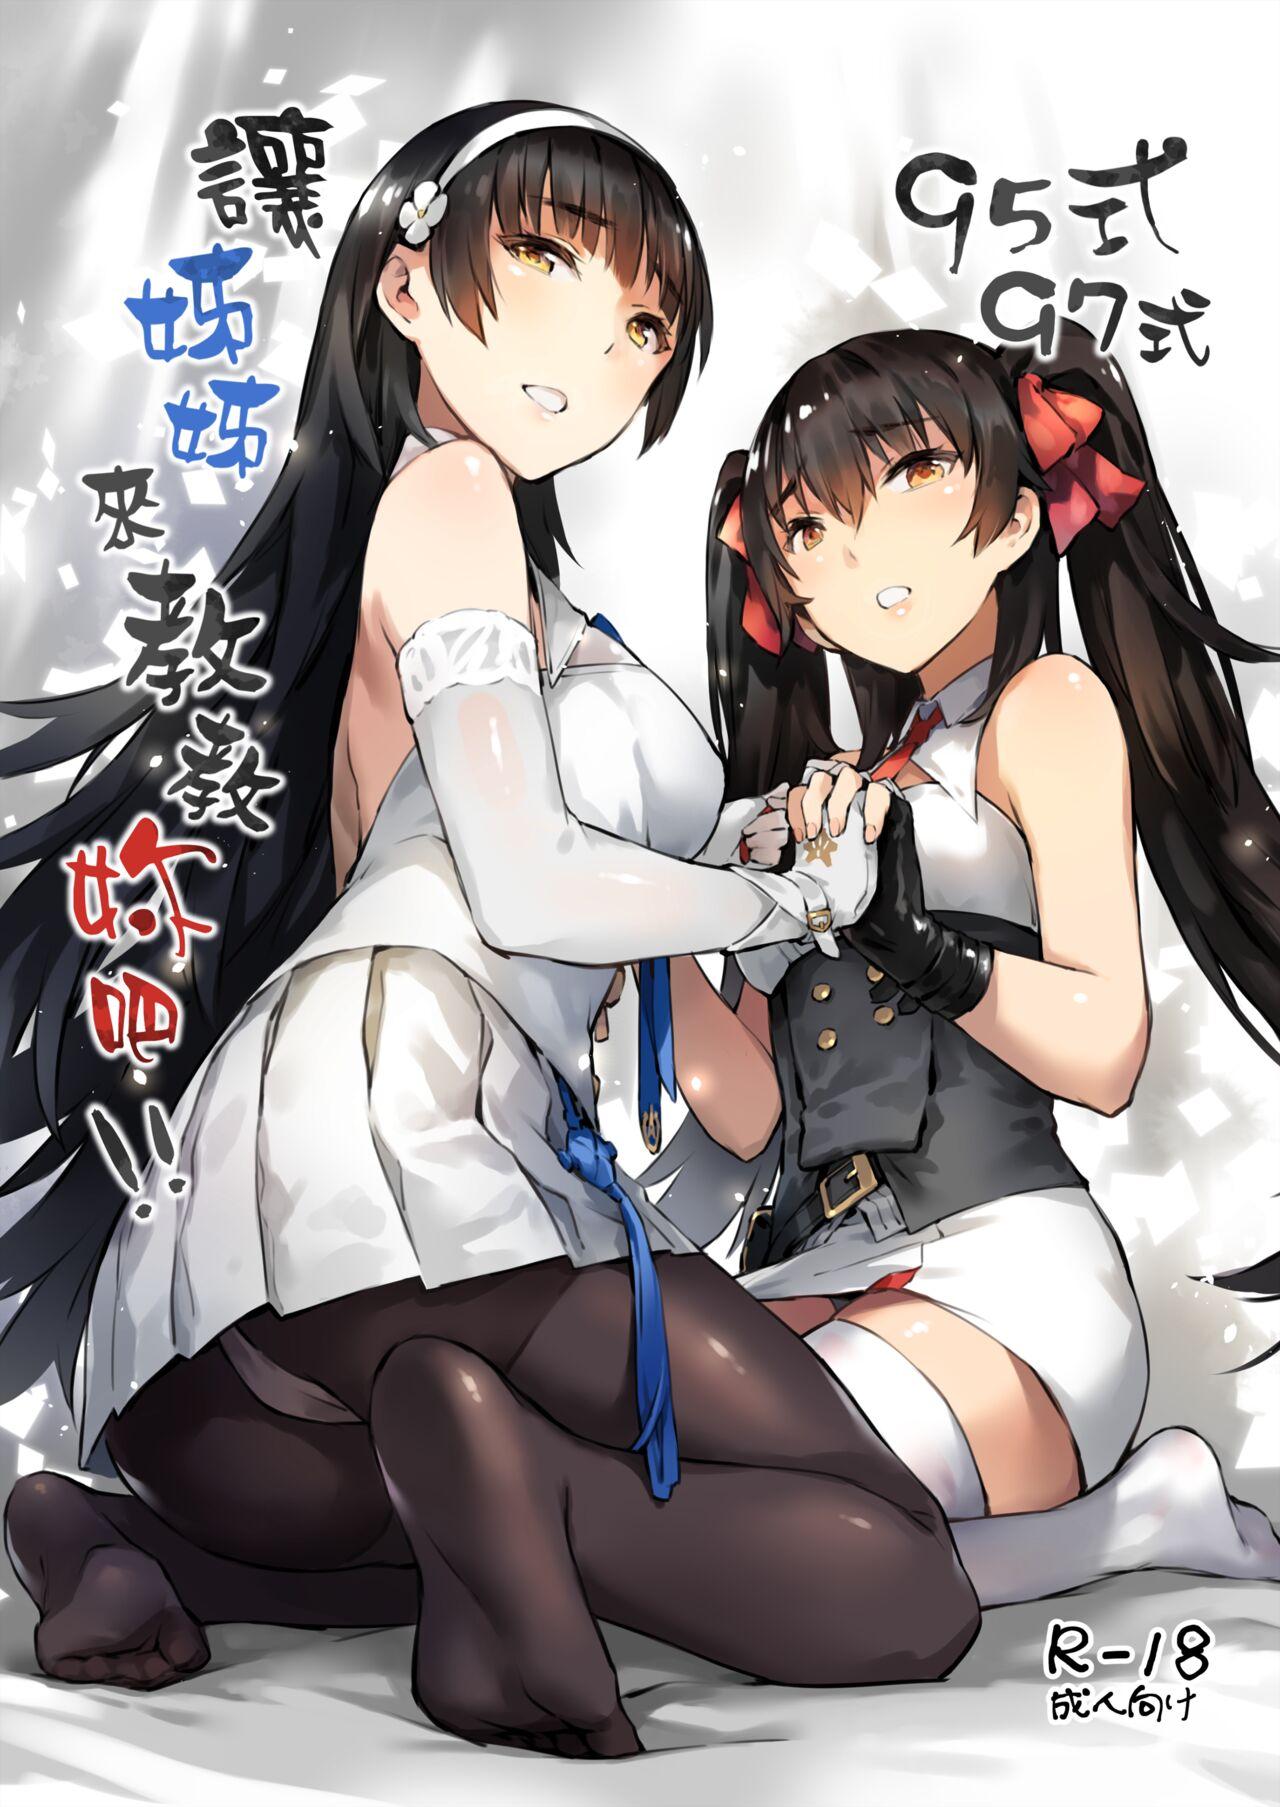 Type 95 Type 97, Let Sister Teaches You!! 0